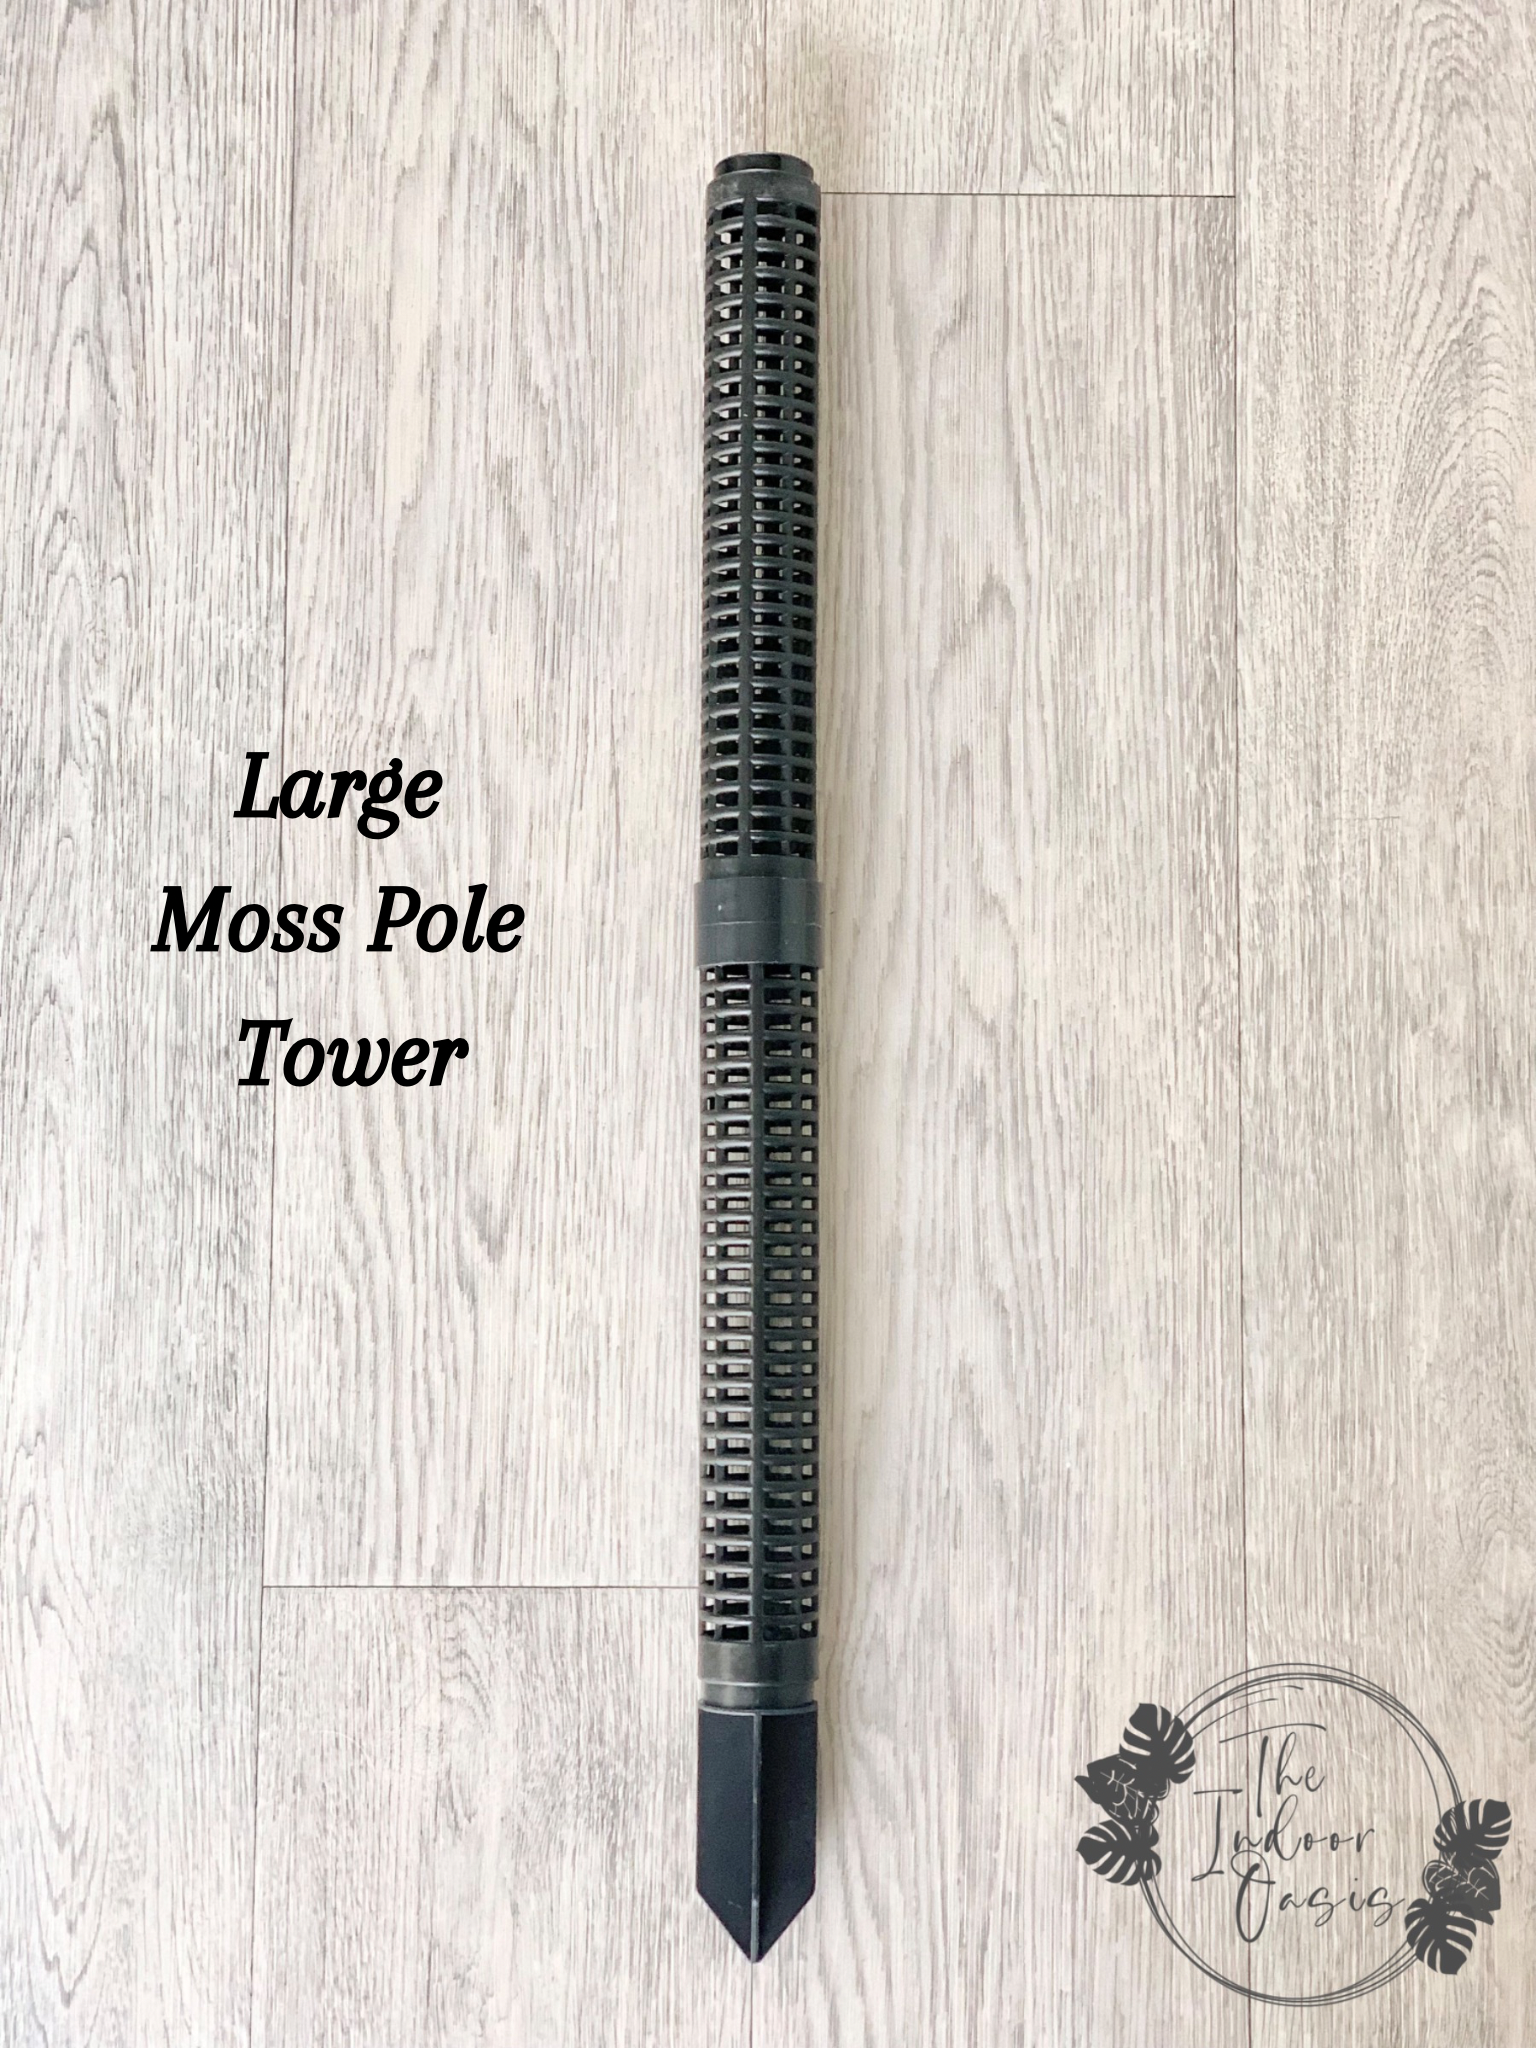 Modular Moss Pole Tower Black / Frosted